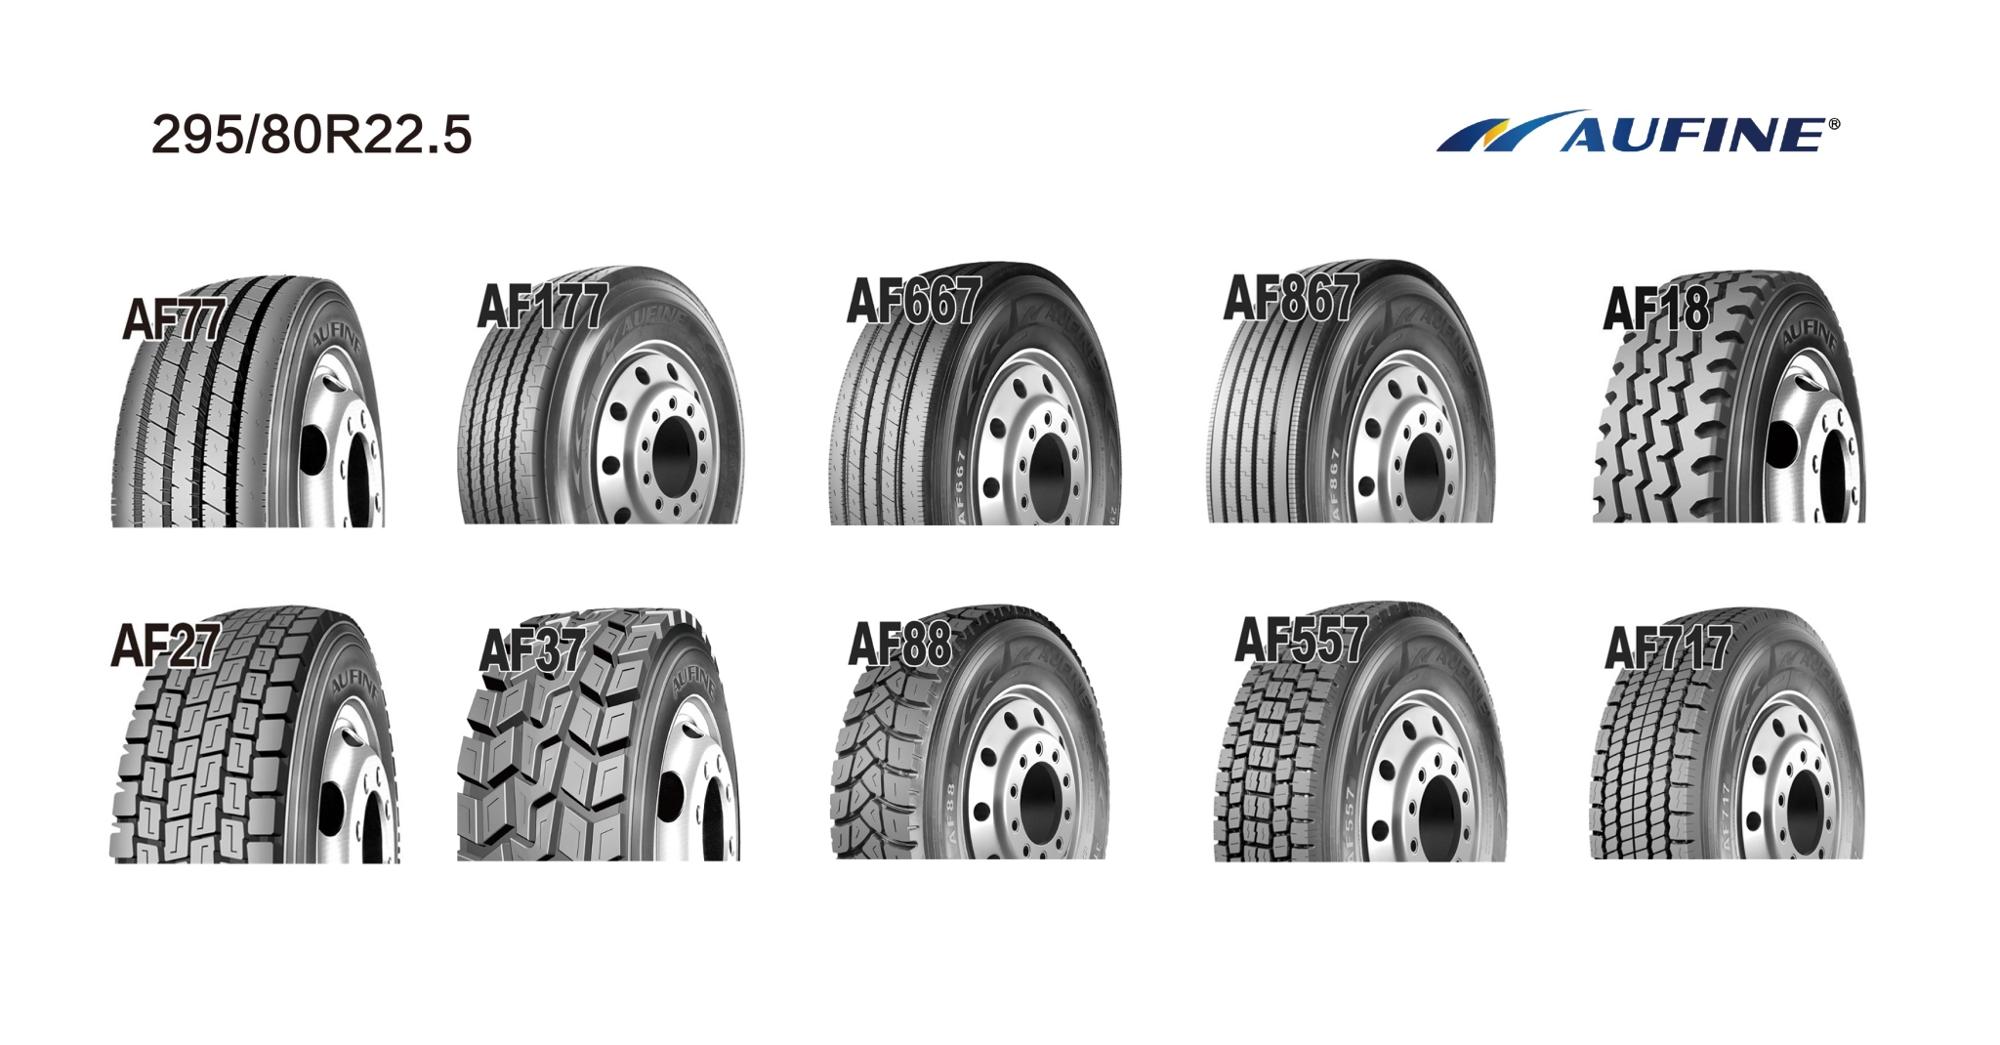 TRAILERS ALL POSITION TBR TIRE IN 1100R2O WITH GCC, DOT AUFINE HIGH QUALITY FAMOUS BRAND with ECE